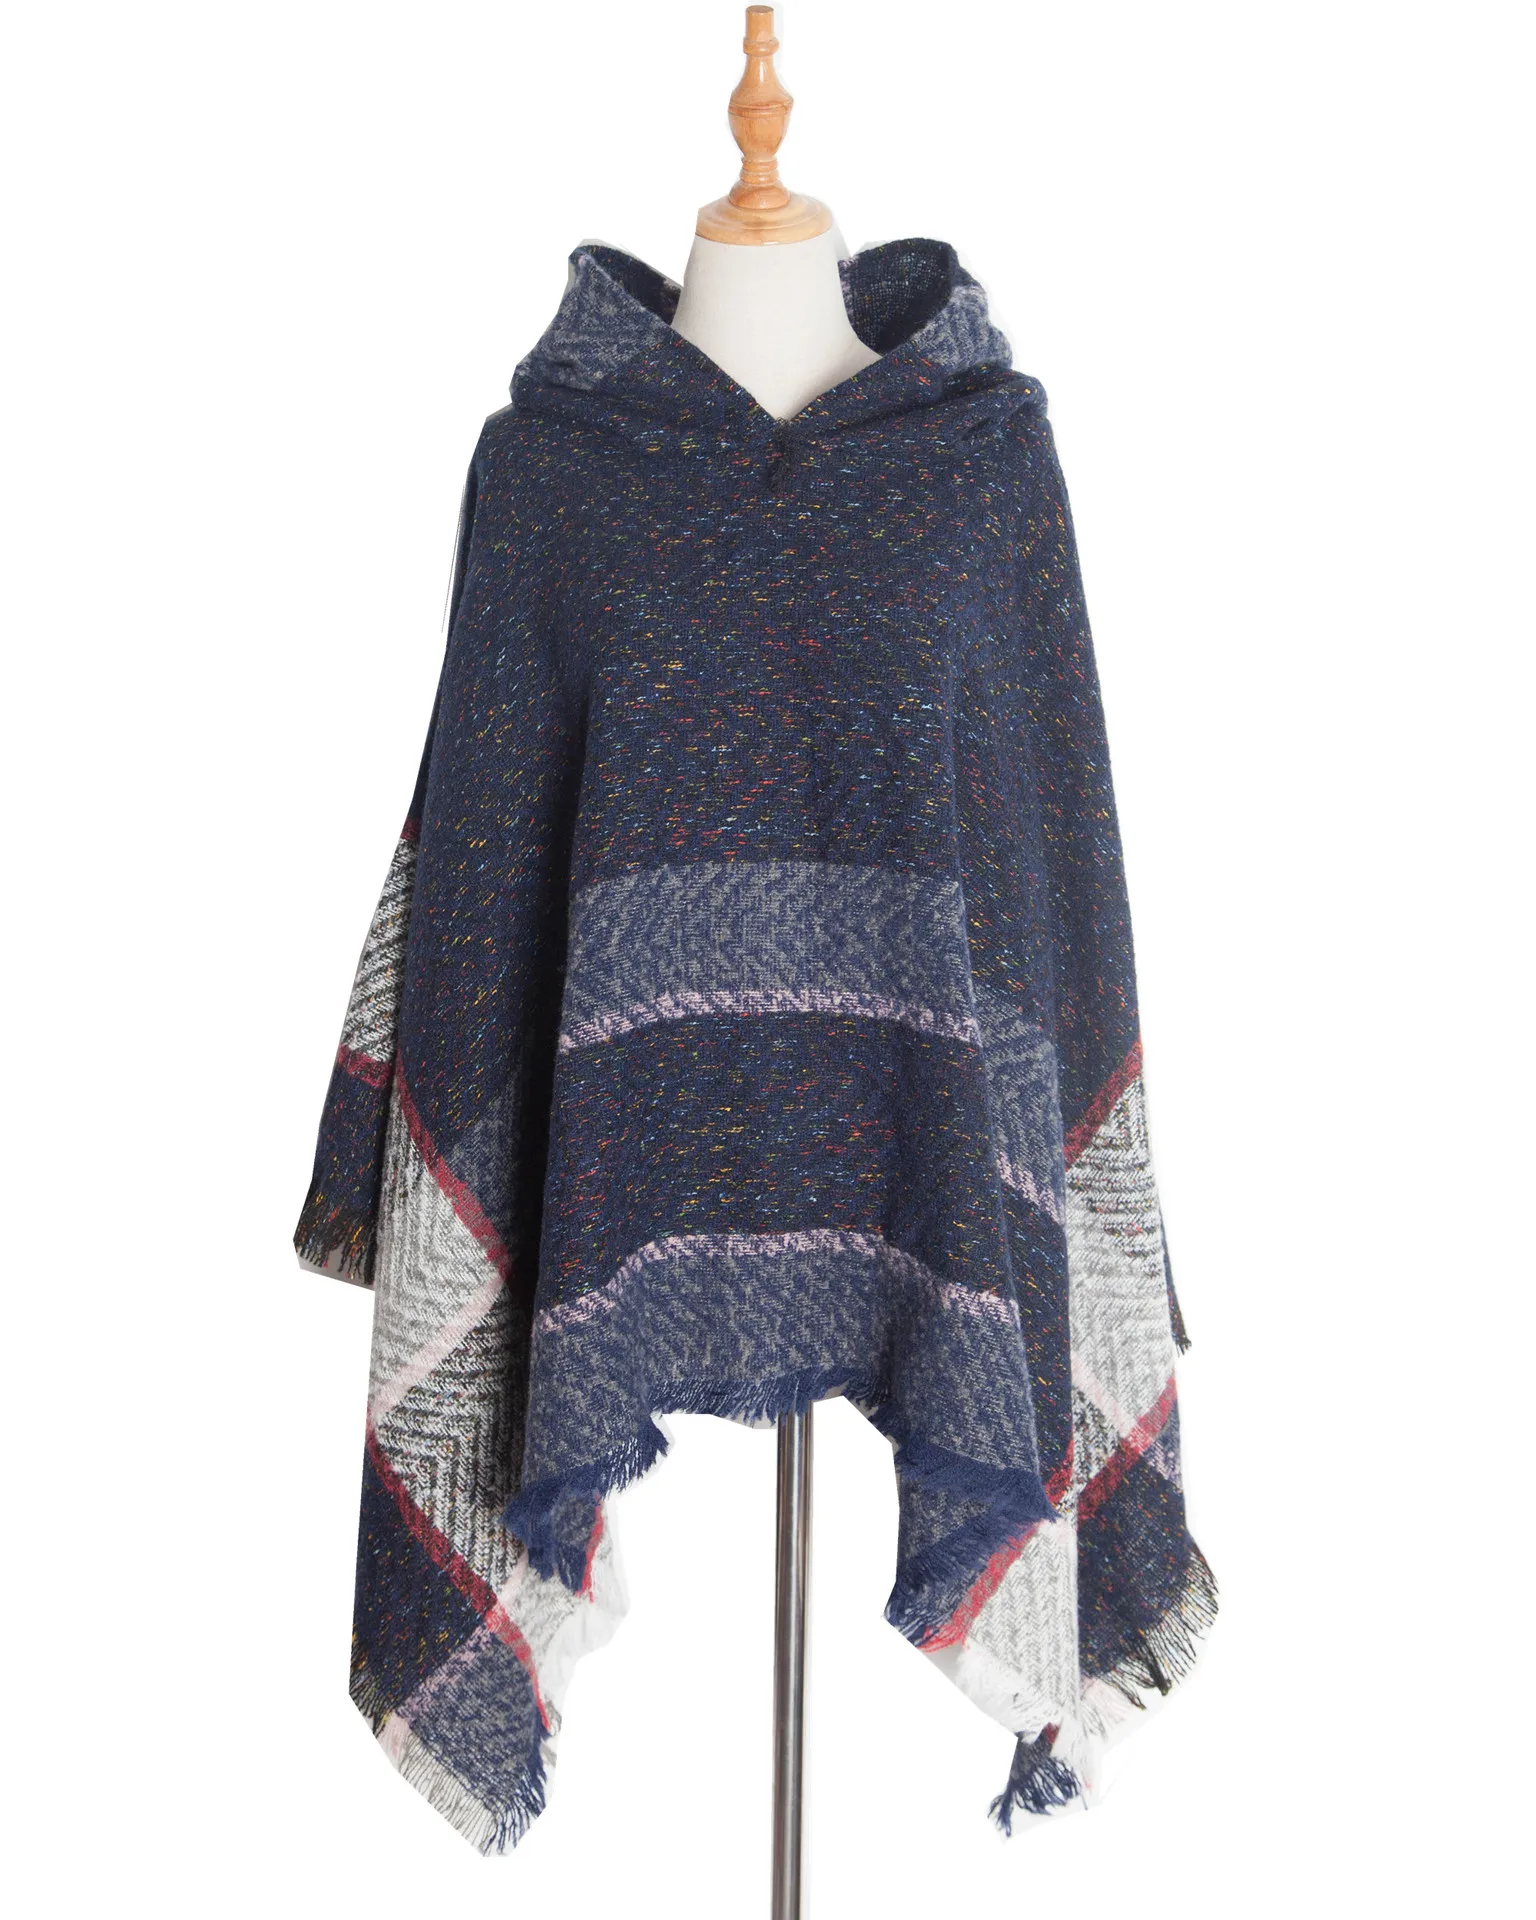 New Autumn Winter Fishbone Pattern Women's Hooded Cape Pullover Cape Women Poncho Lady Capes Navy Cloaks autumn winter new style color contrast striped national style tassel pullover cloak poncho lady capes gray cloaks